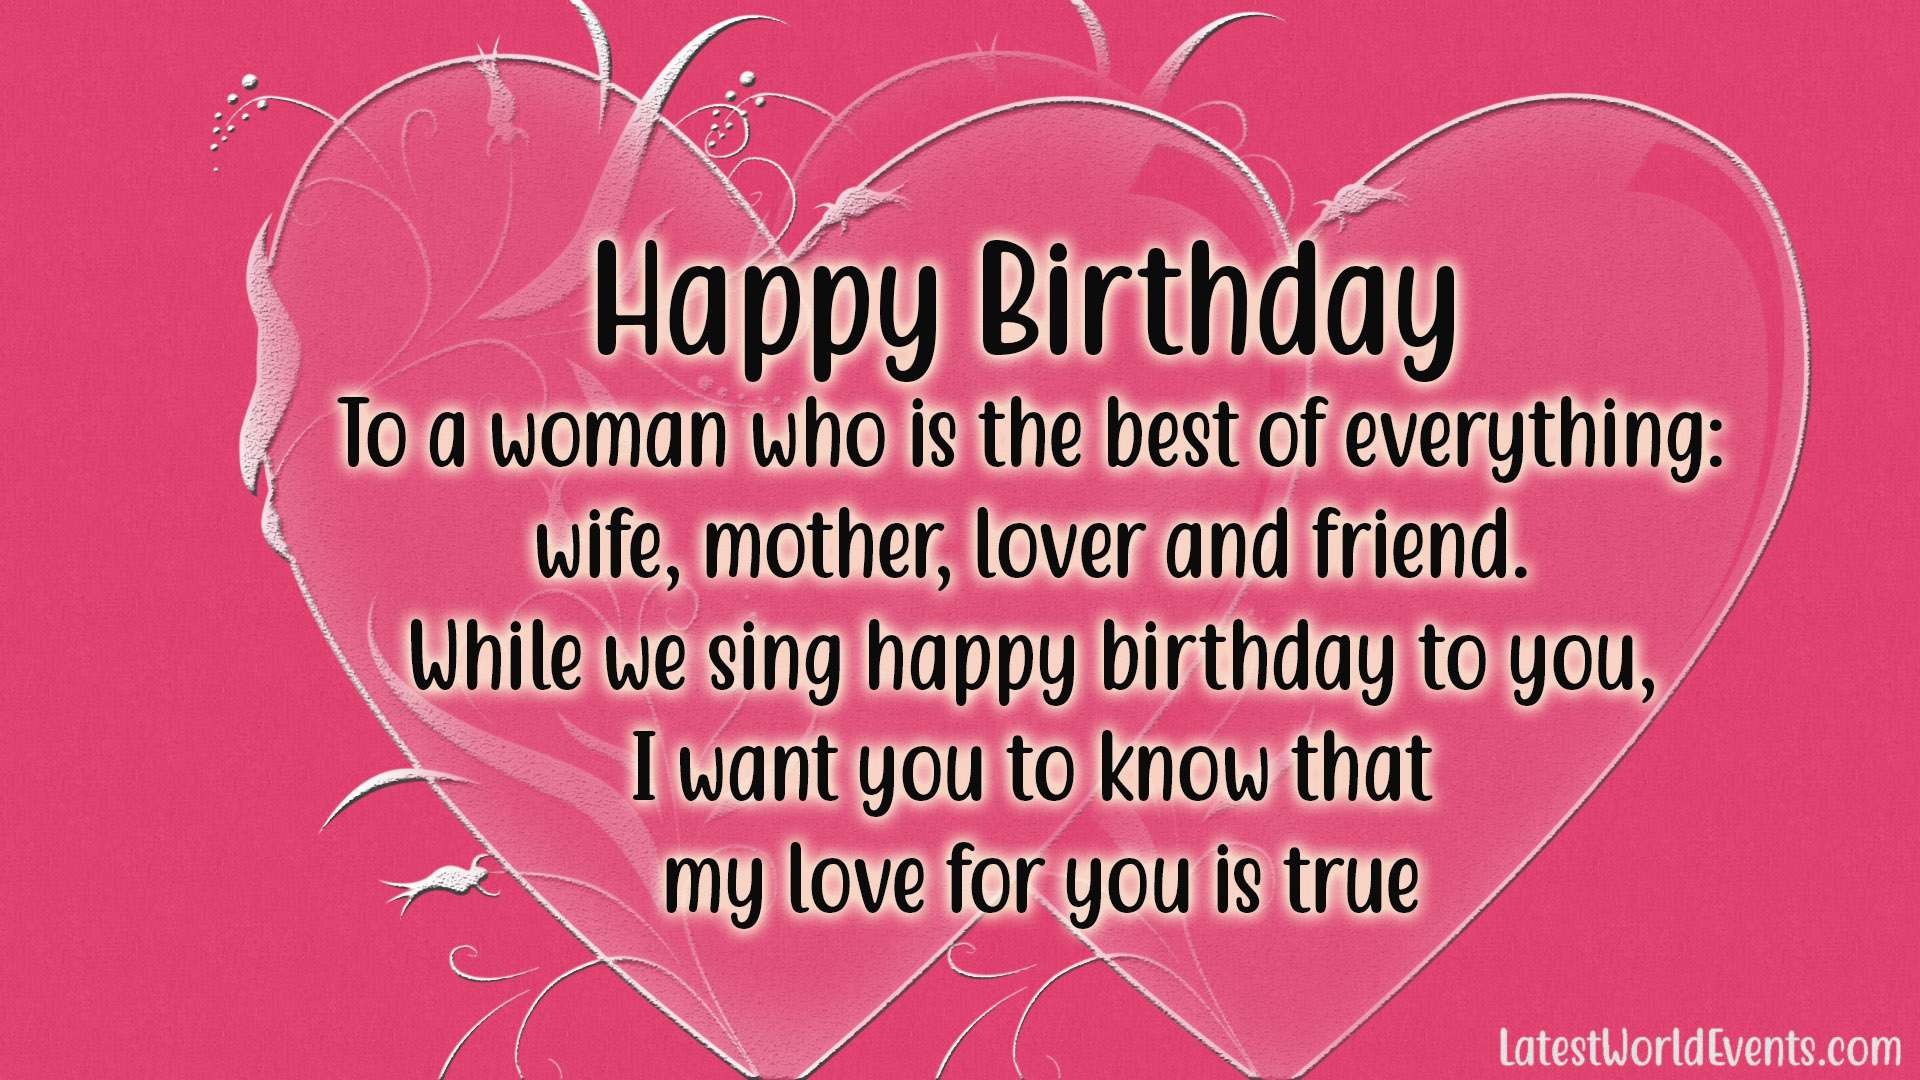 Happy birthday wishes for wife &  Birthday quotes for wife